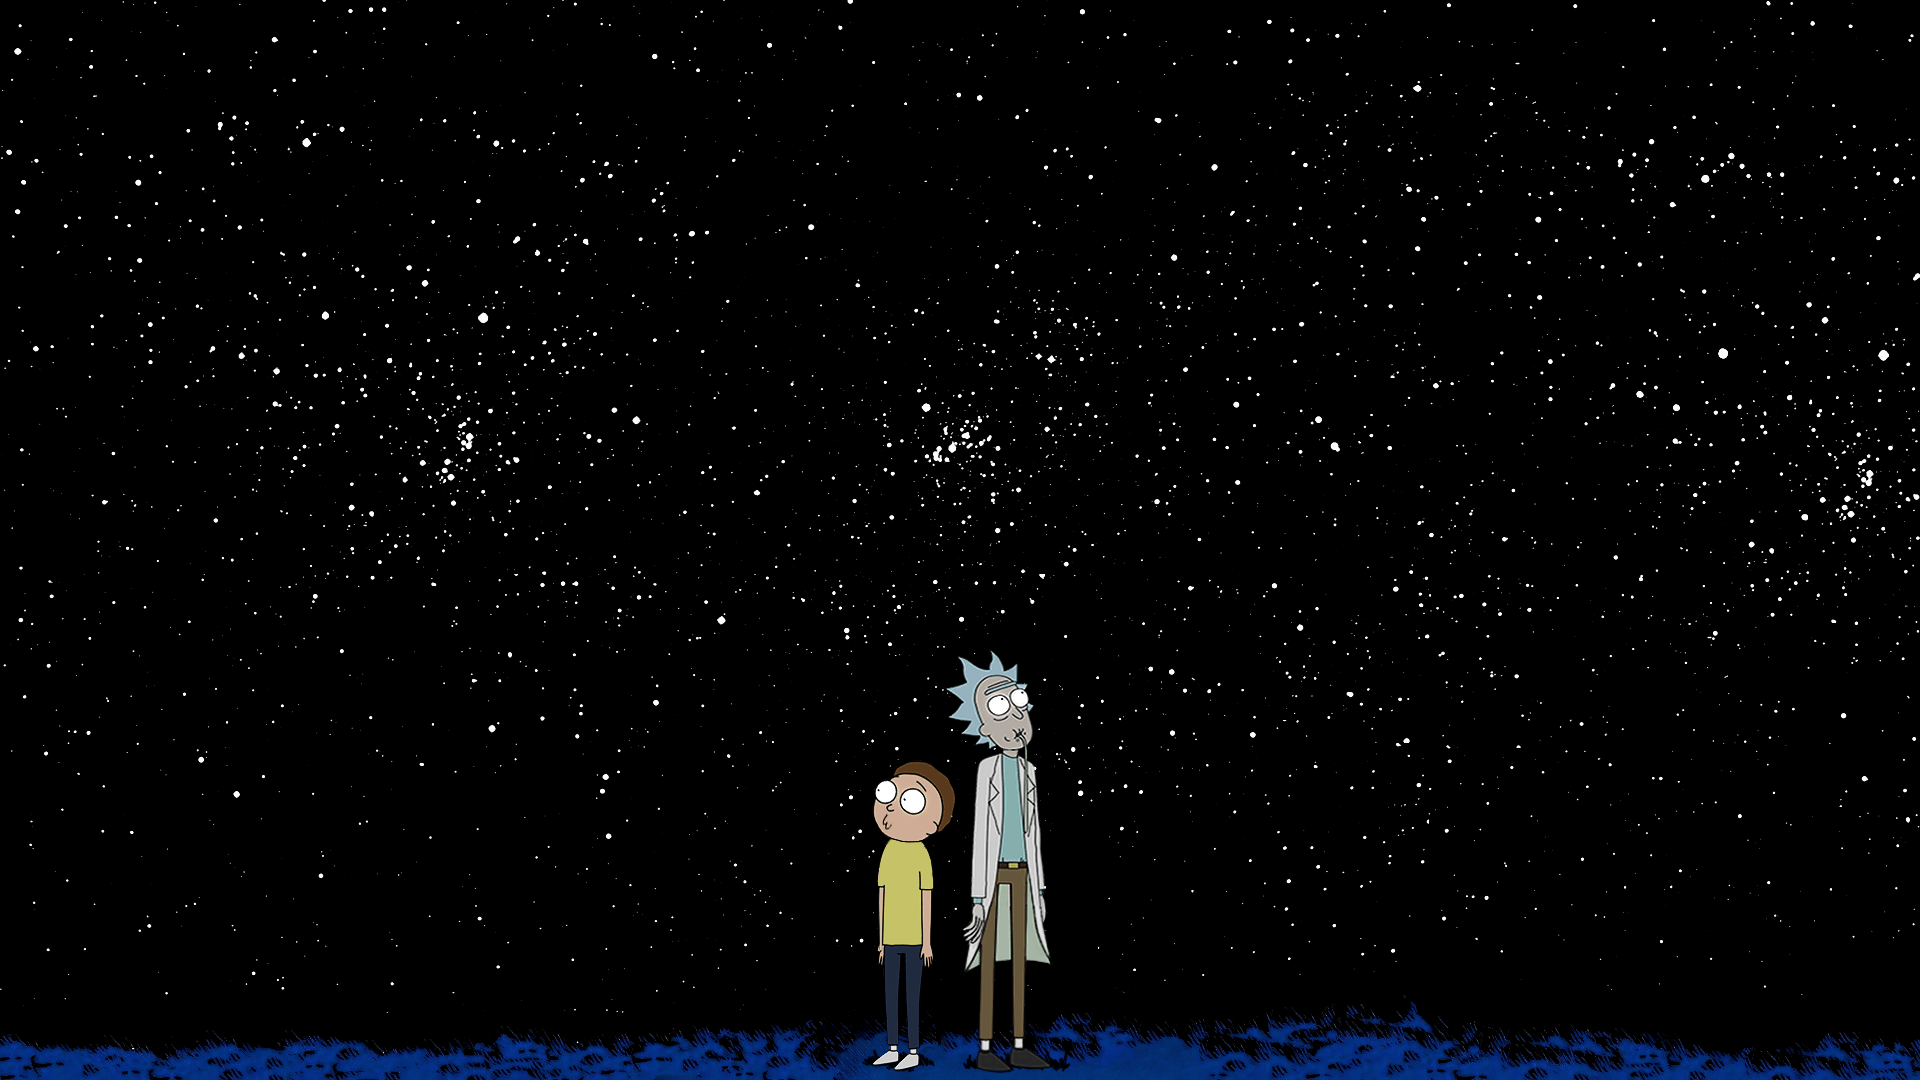 Rick and Morty wallpaper inspired by a resent post